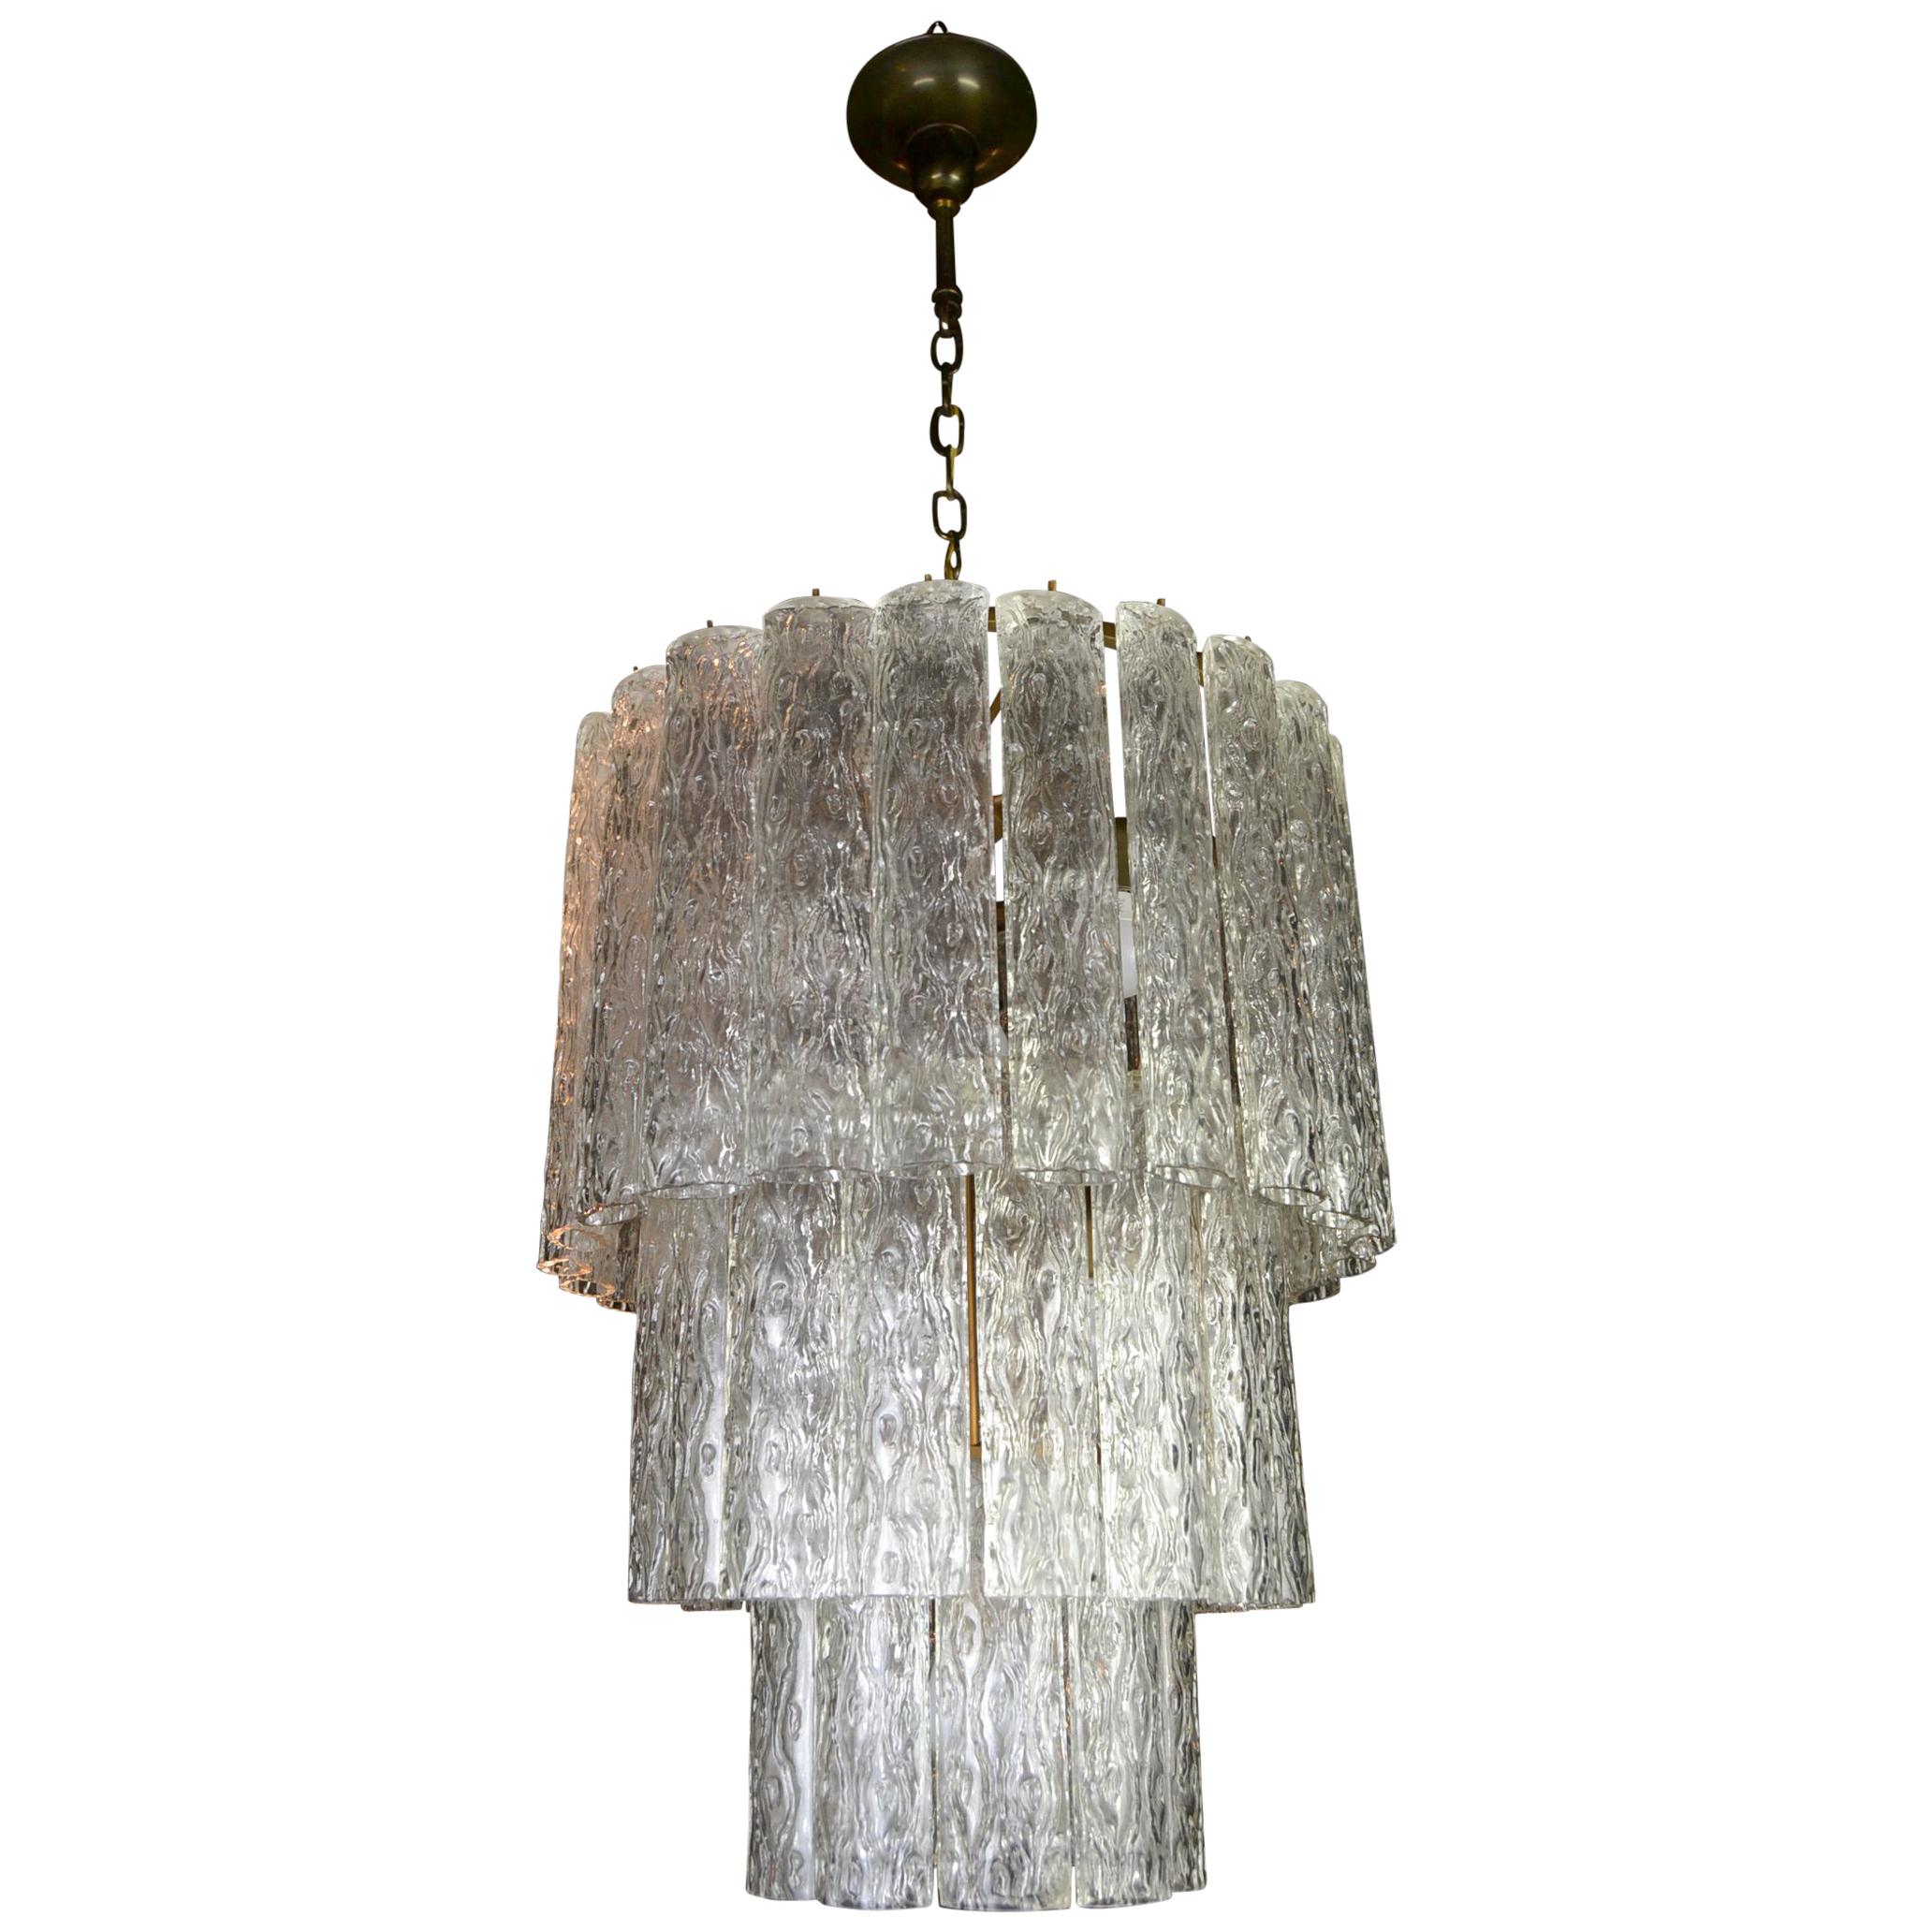  Sculptural Doria Chandelier with 50 Art Glass Tubes, 1960s , Germany